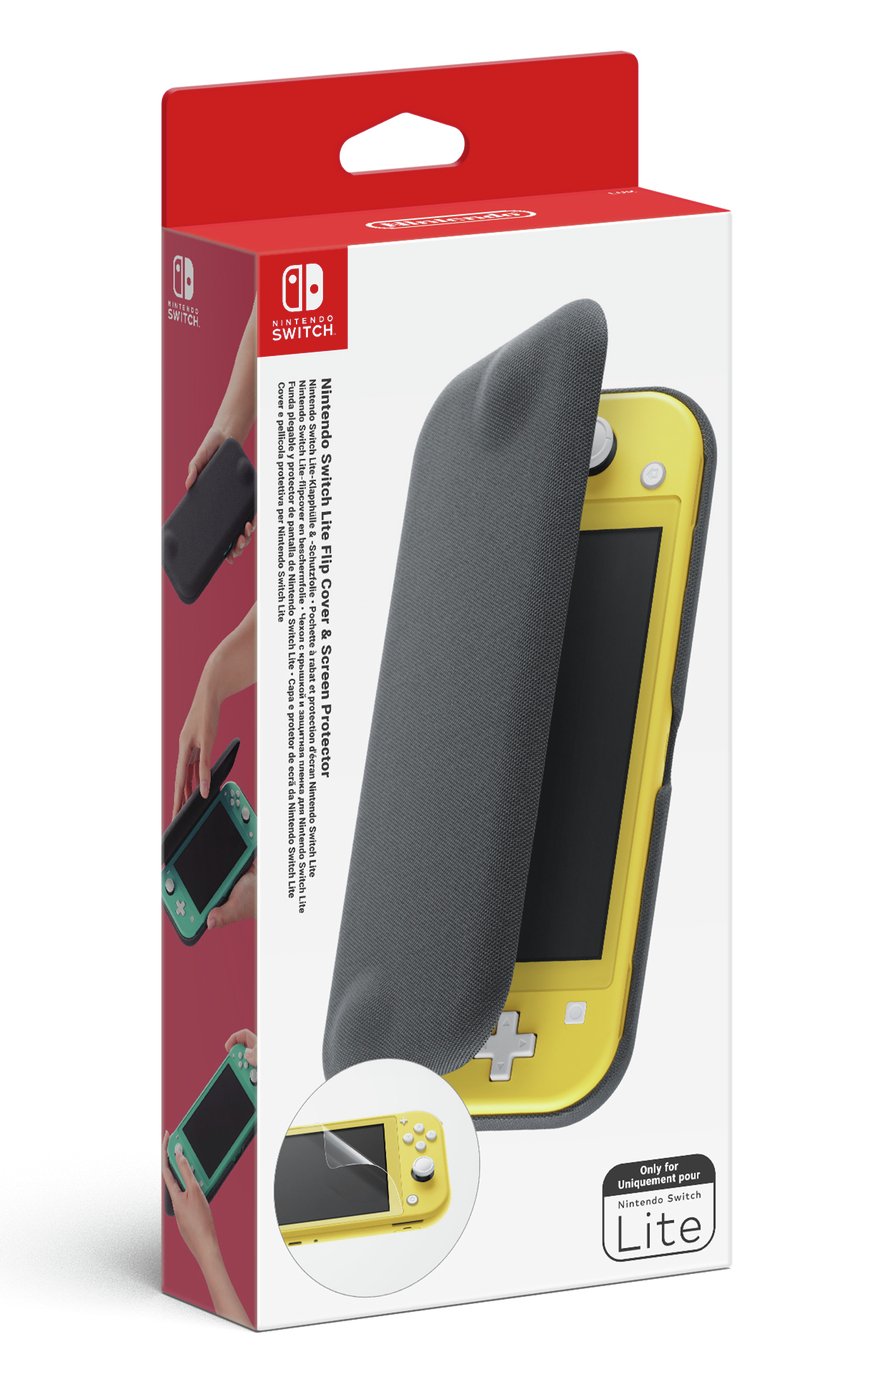 Nintendo Switch Lite Flip Cover Screen Protector Review